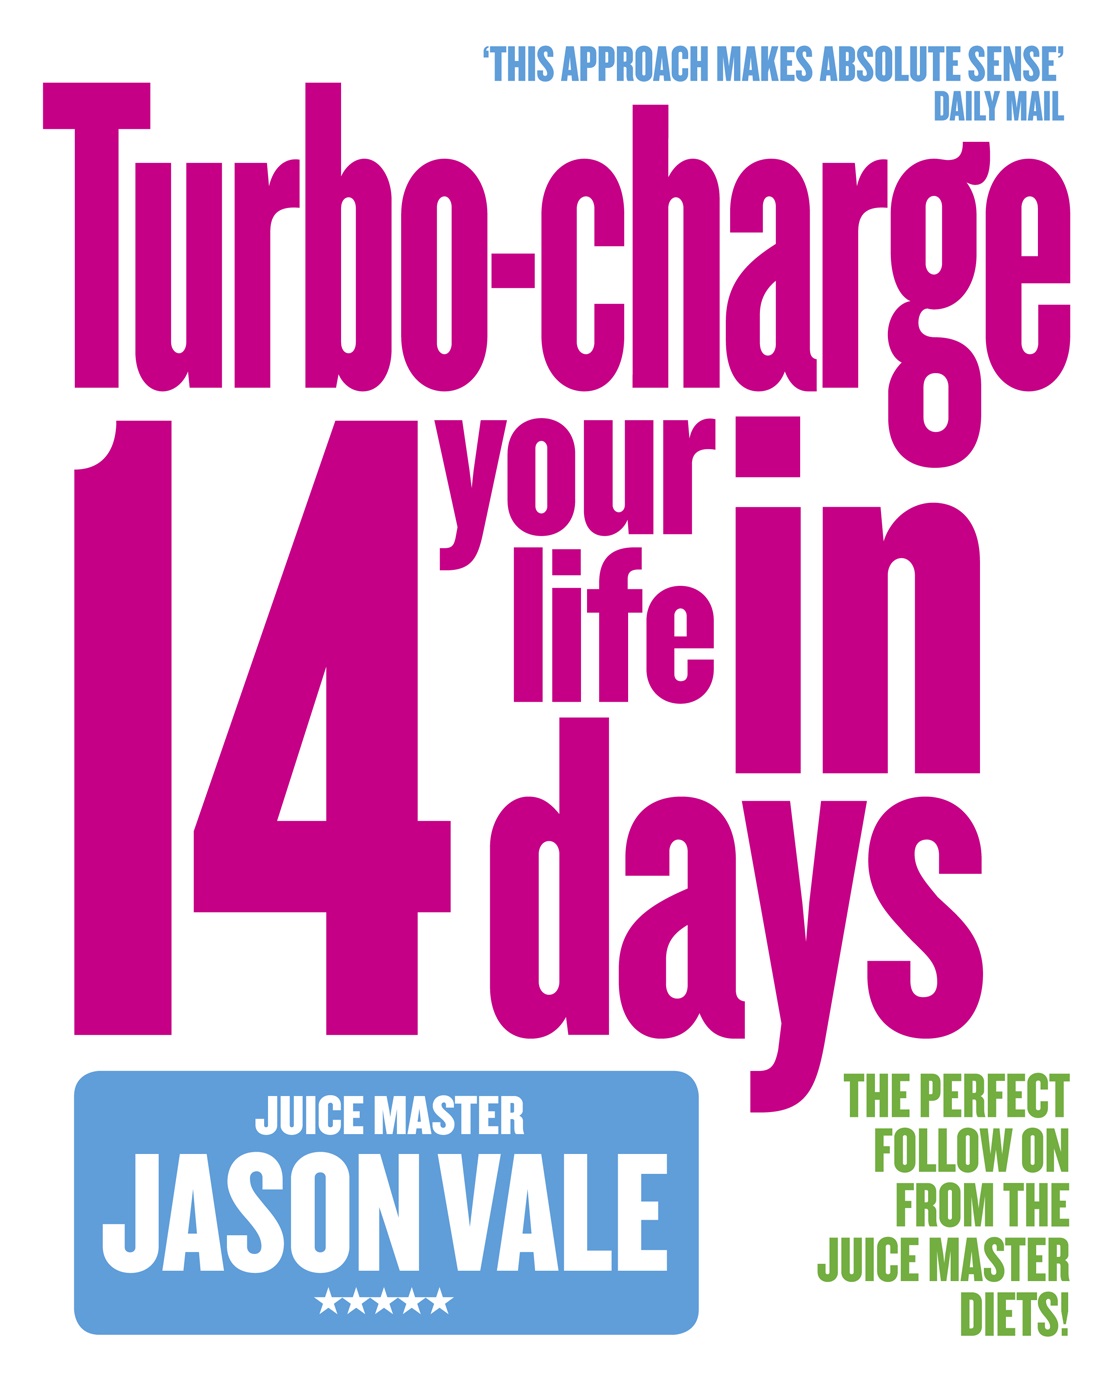 The Juice Master: Turbo-charge Your Life in 14 Days